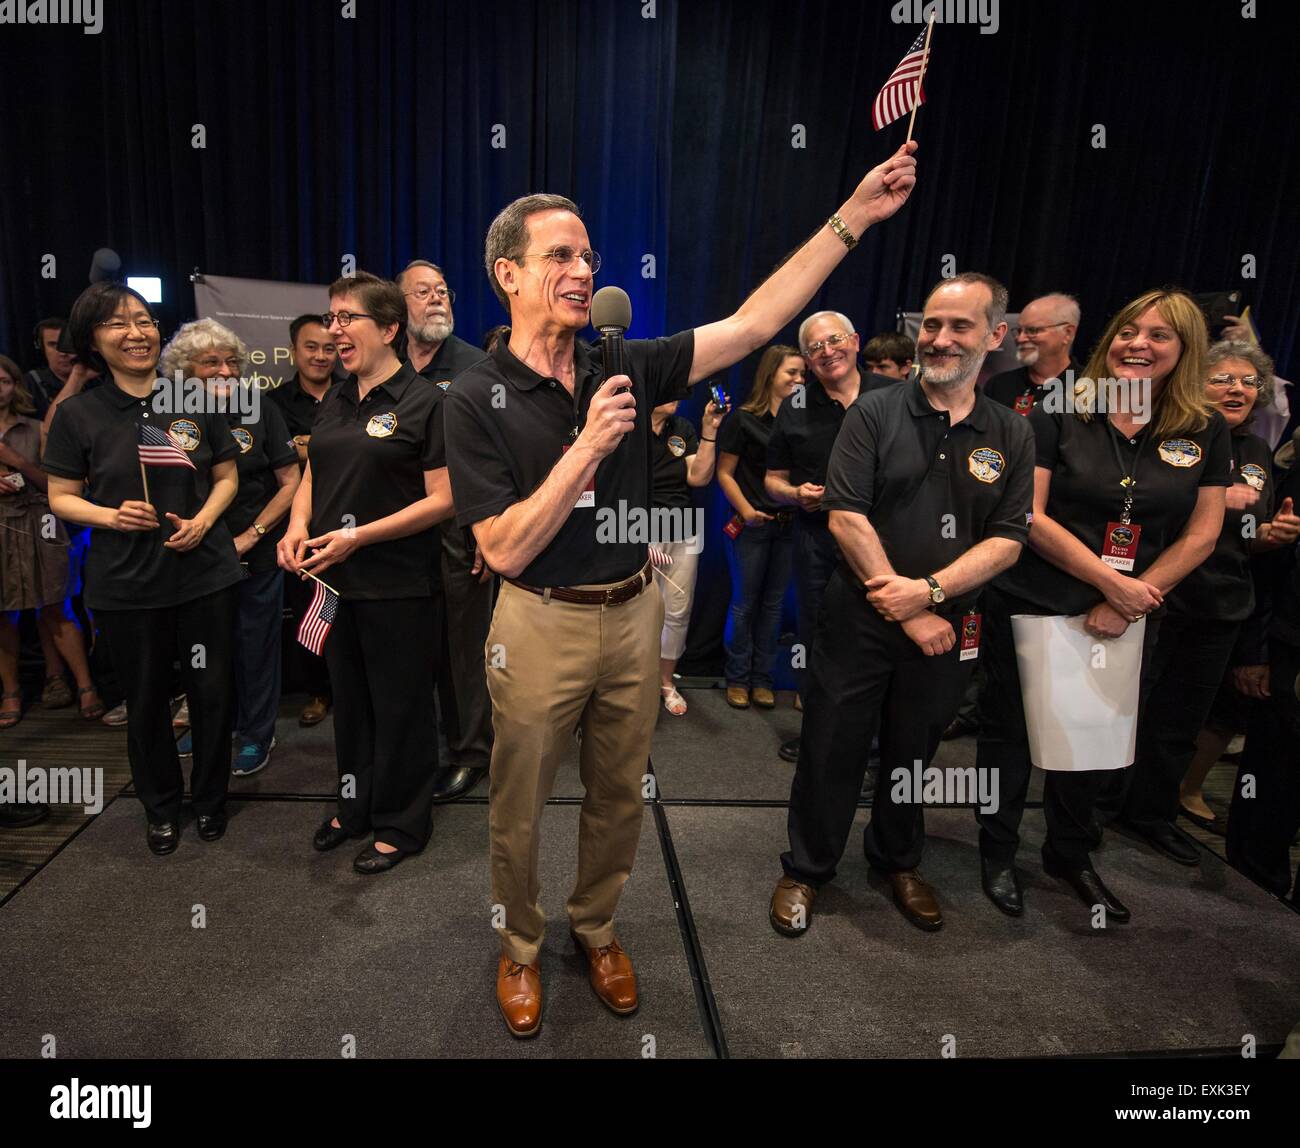 Laurel, Maryland, USA. 14th July, 2015. Johns Hopkins University APL Director Ralph Semmel waves an American flag and praises the hard work of all that worked New Horizons spacecraft after the space probe flyby of Pluto at Johns Hopkins University Applied Physics Laboratory July 14, 2015 in Laurel, Maryland. Stock Photo